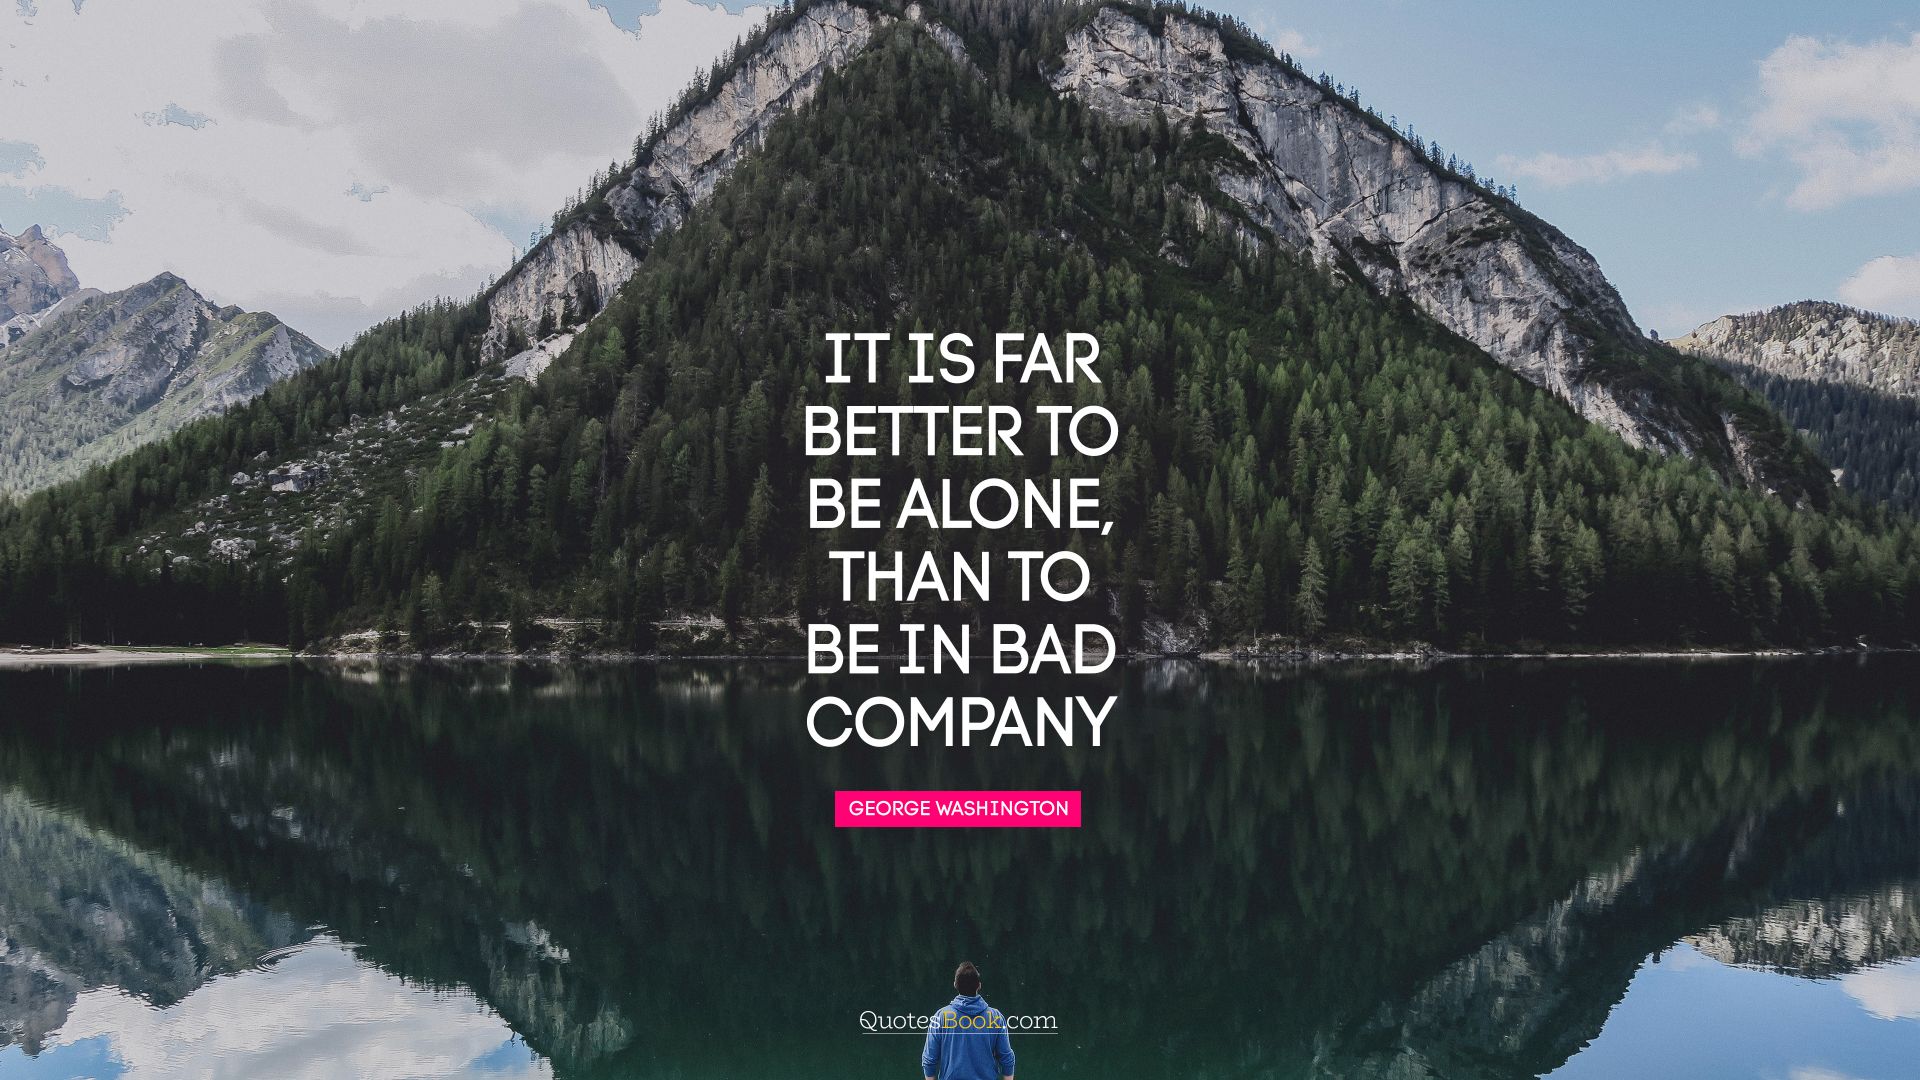 It is far better to be alone, than to be in bad company. - Quote by George Washington